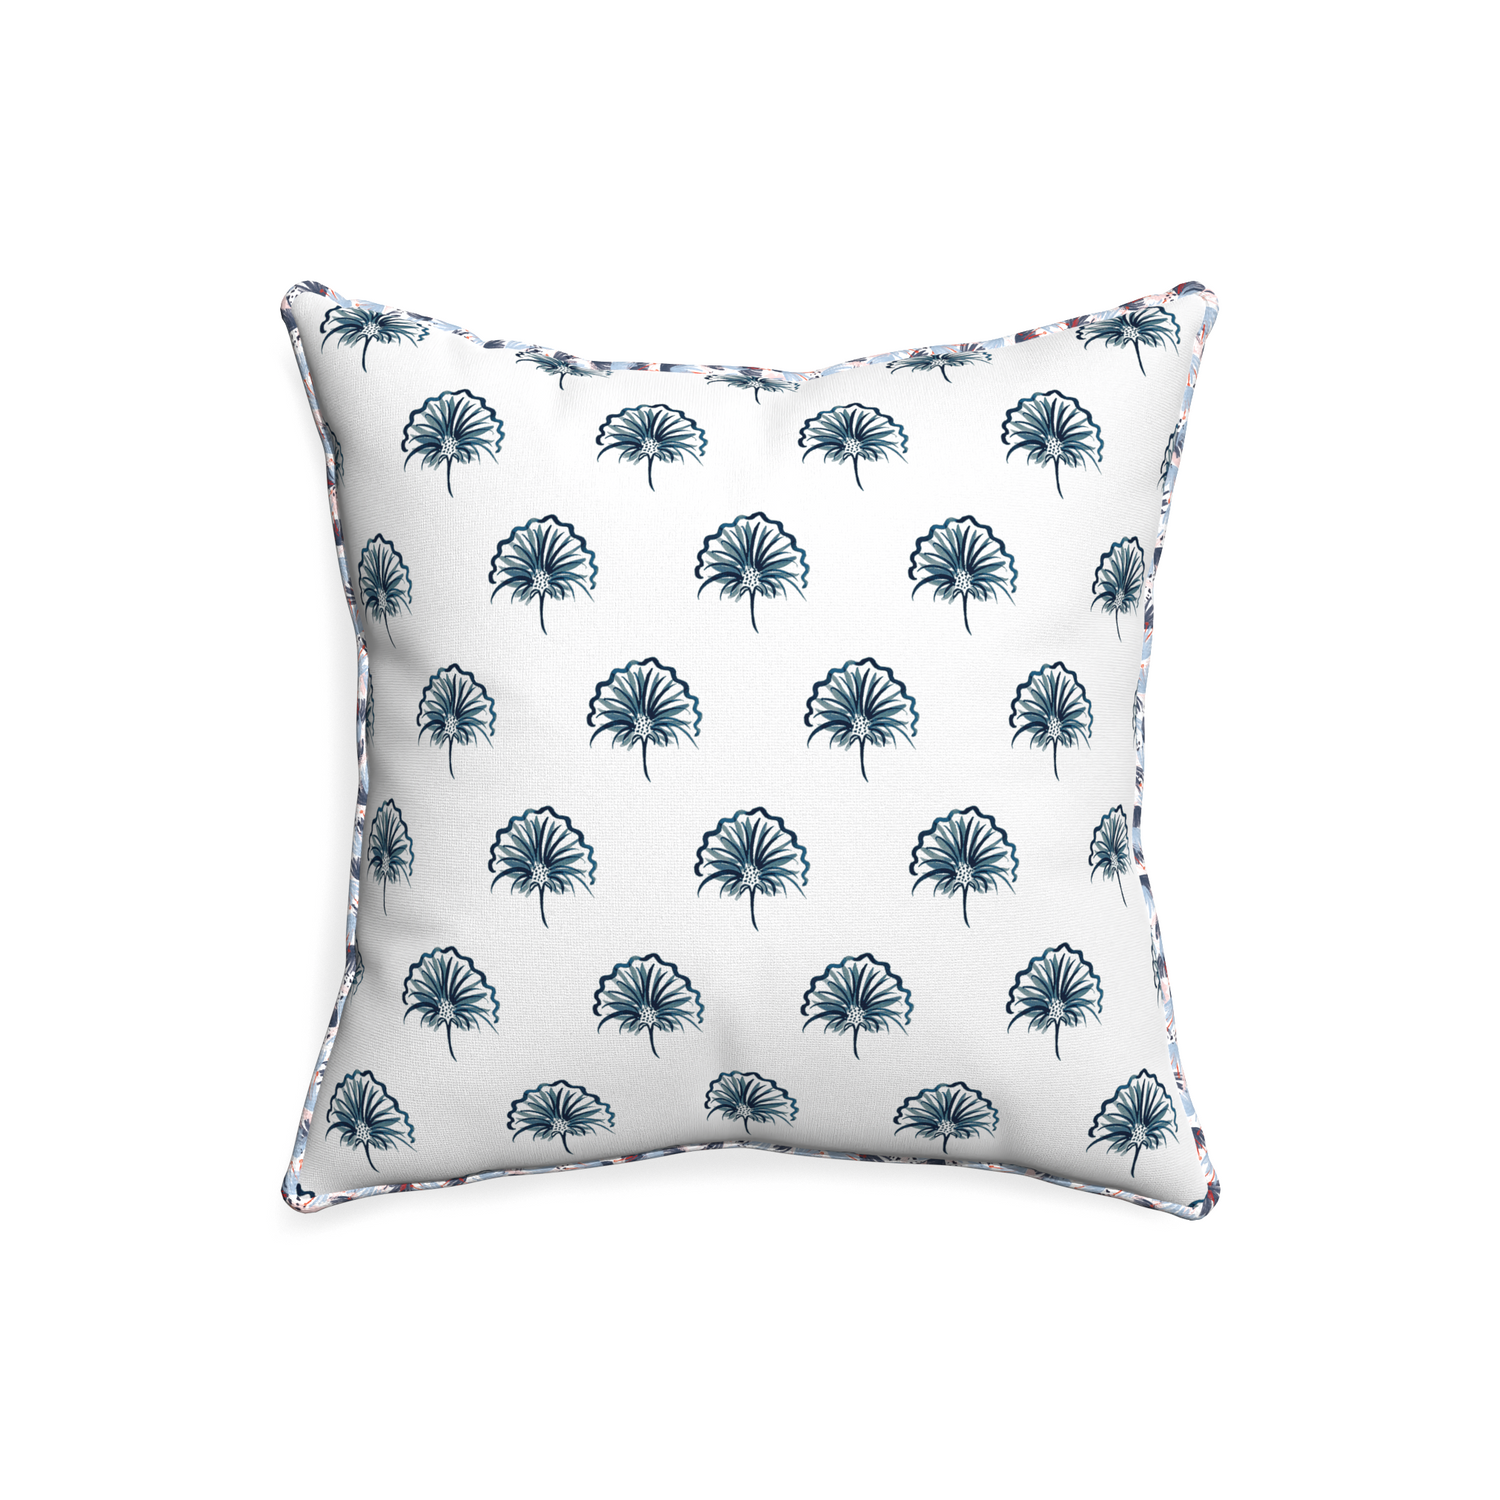 20-square penelope midnight custom floral navypillow with e piping on white background